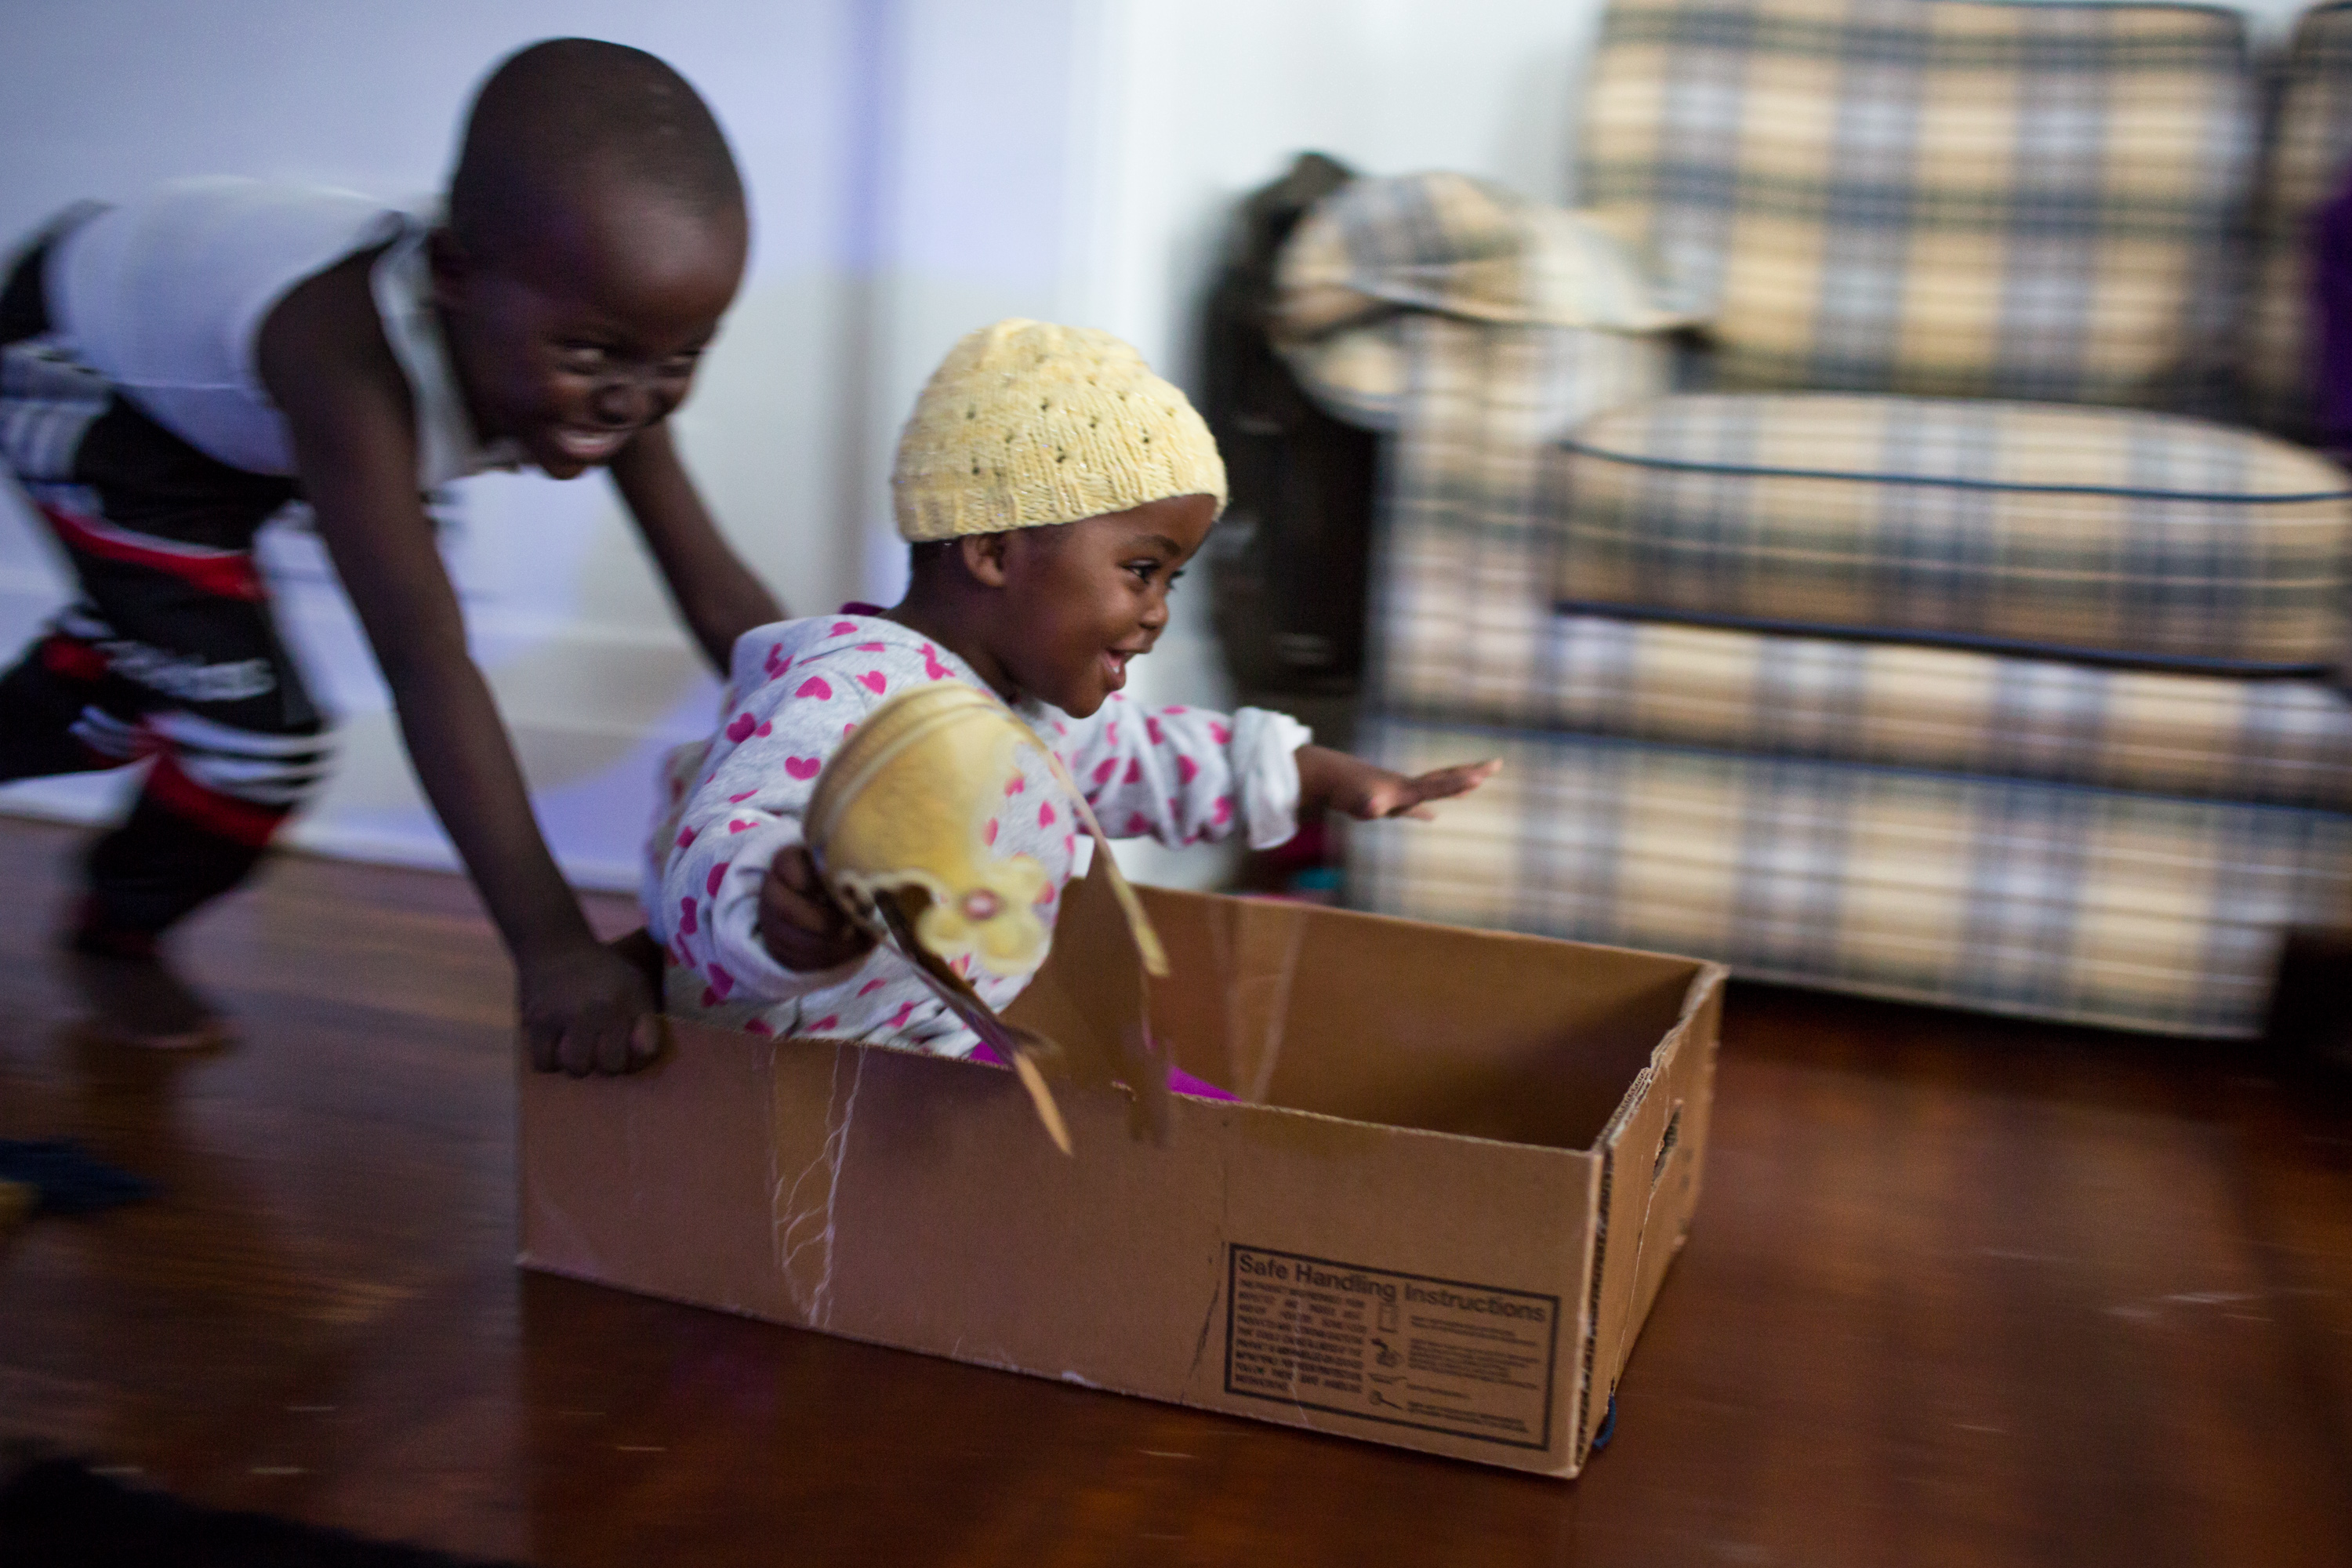 Hassan Abdikadir, 5, pushes his sister, Khadijo, 2, across the living room floor in a cardboard box, as she holds a paper crown from their first ever visit to a Burger King earlier in the day, on Dec. 9, 2016, in the family's newly settled apartment in Rochester, N.Y. The Abdikadir family moved to Rochester in November of 2016 from a refugee camp in Kenya, after leaving their native home of Somalia nearly ten years prior.